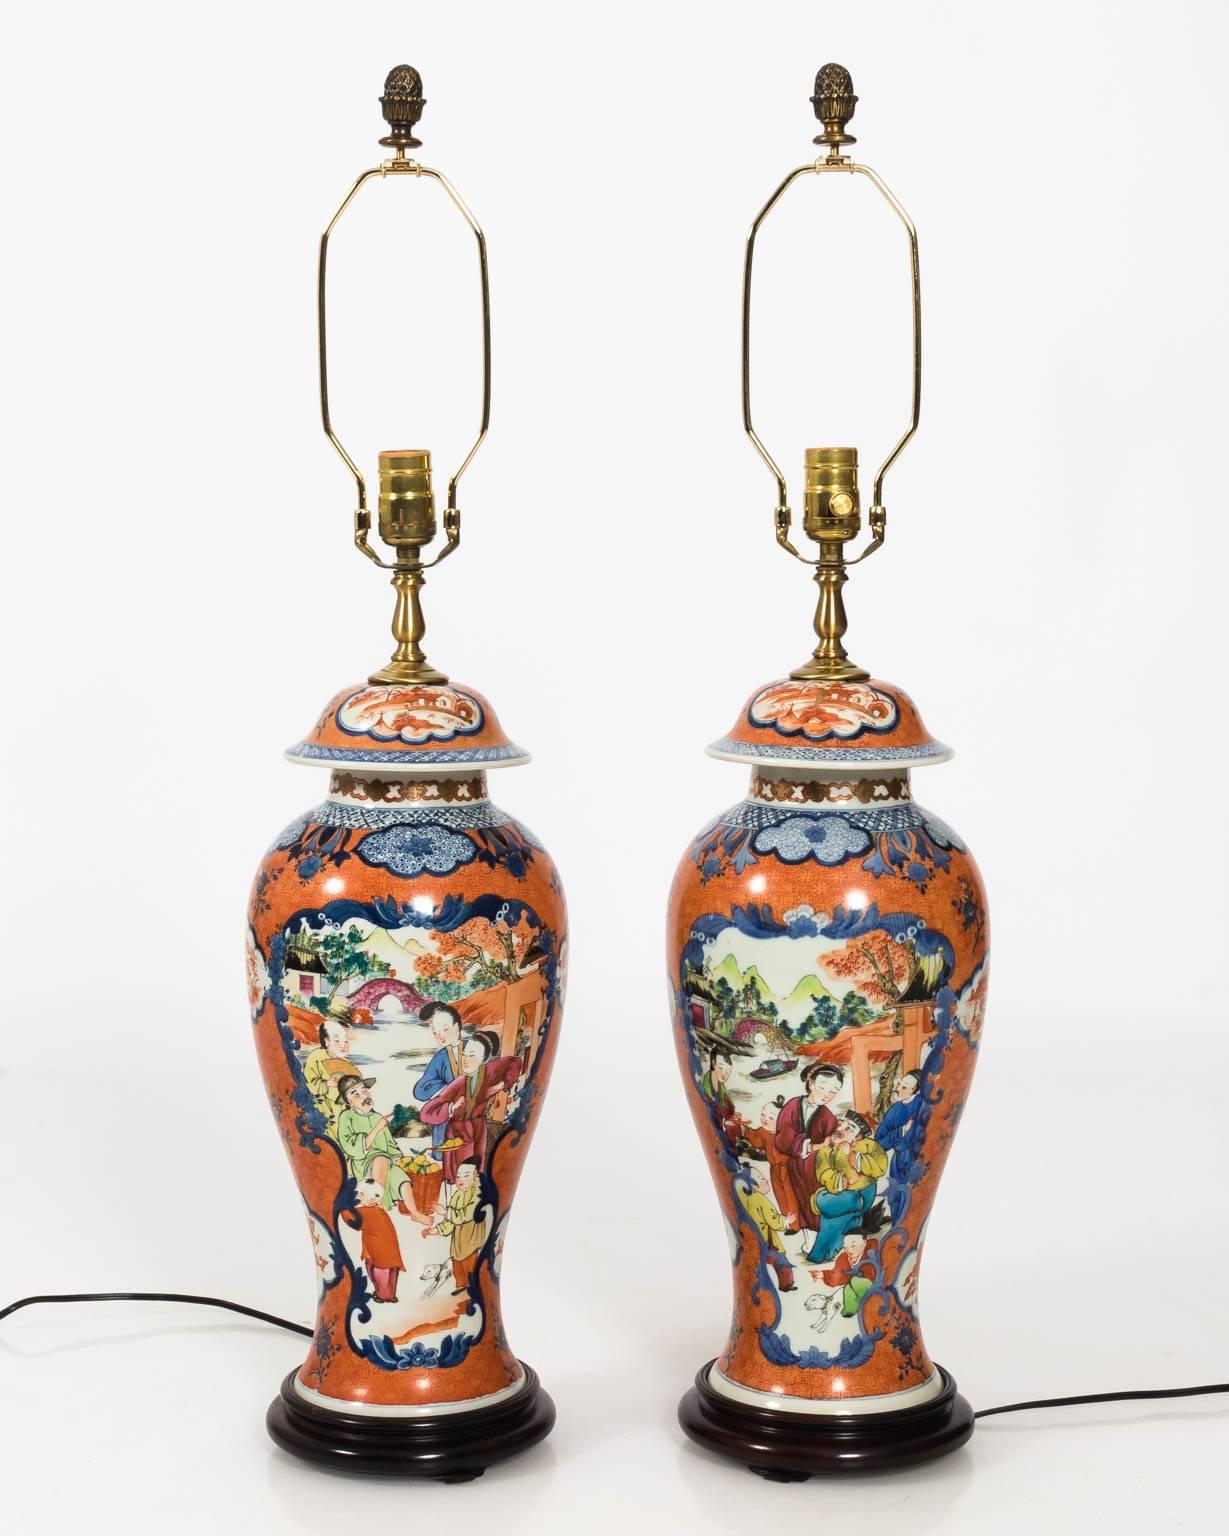 Pair of Chinese porcelain ginger jar lamps with scenic and figural decoration, circa 20th century. Custom pleated shades not included.
 